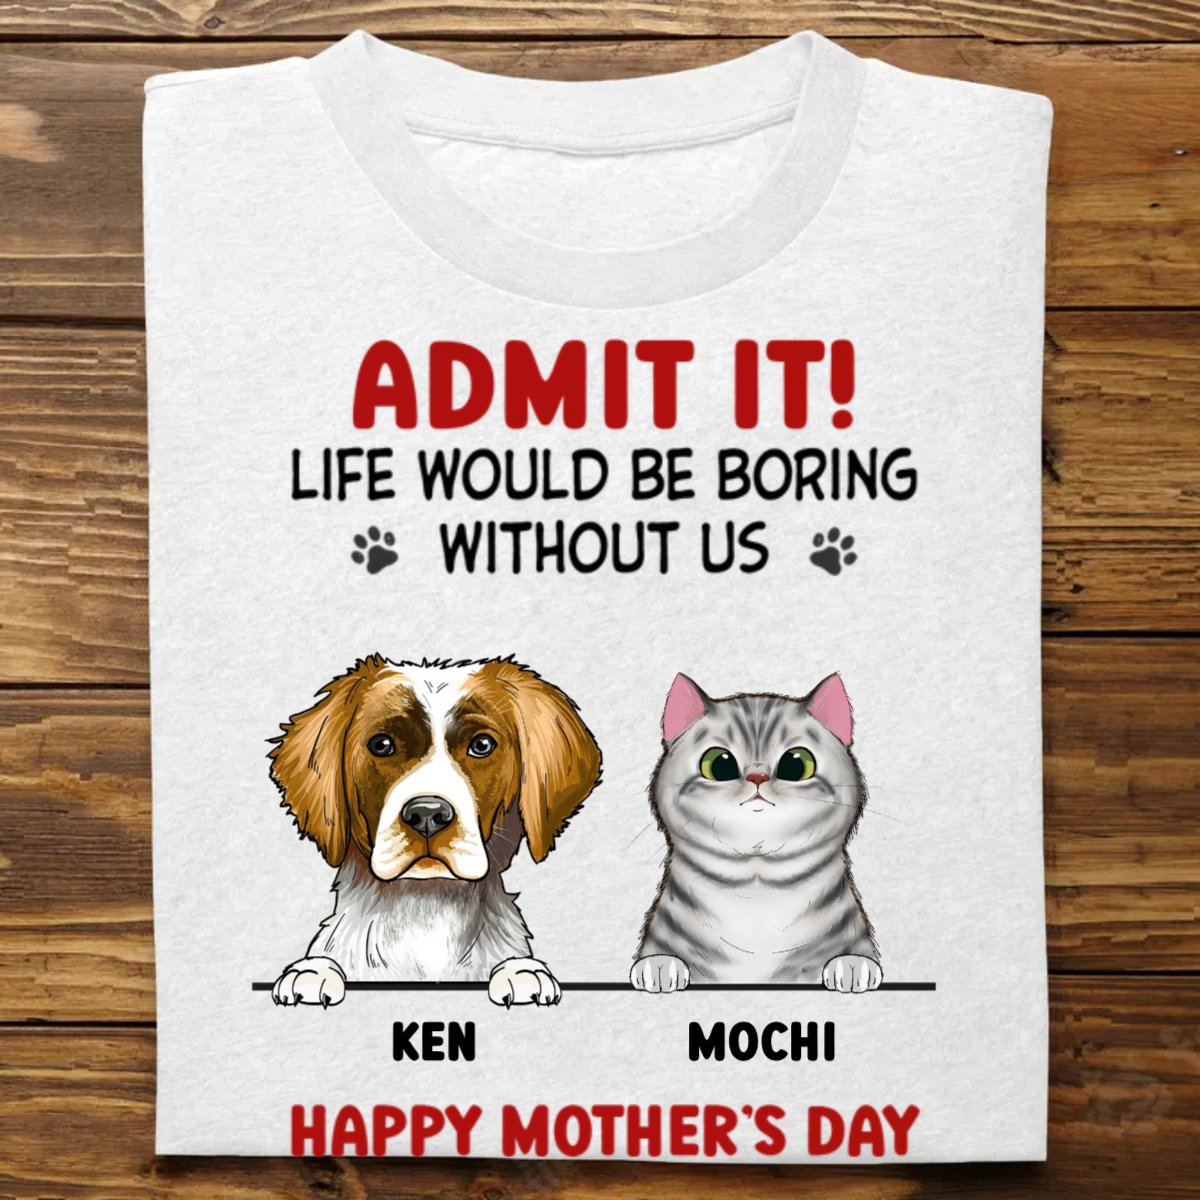 Discover Pet Lovers - Admit It! Life Would Be Boring Without Us - Personalized T-Shirt